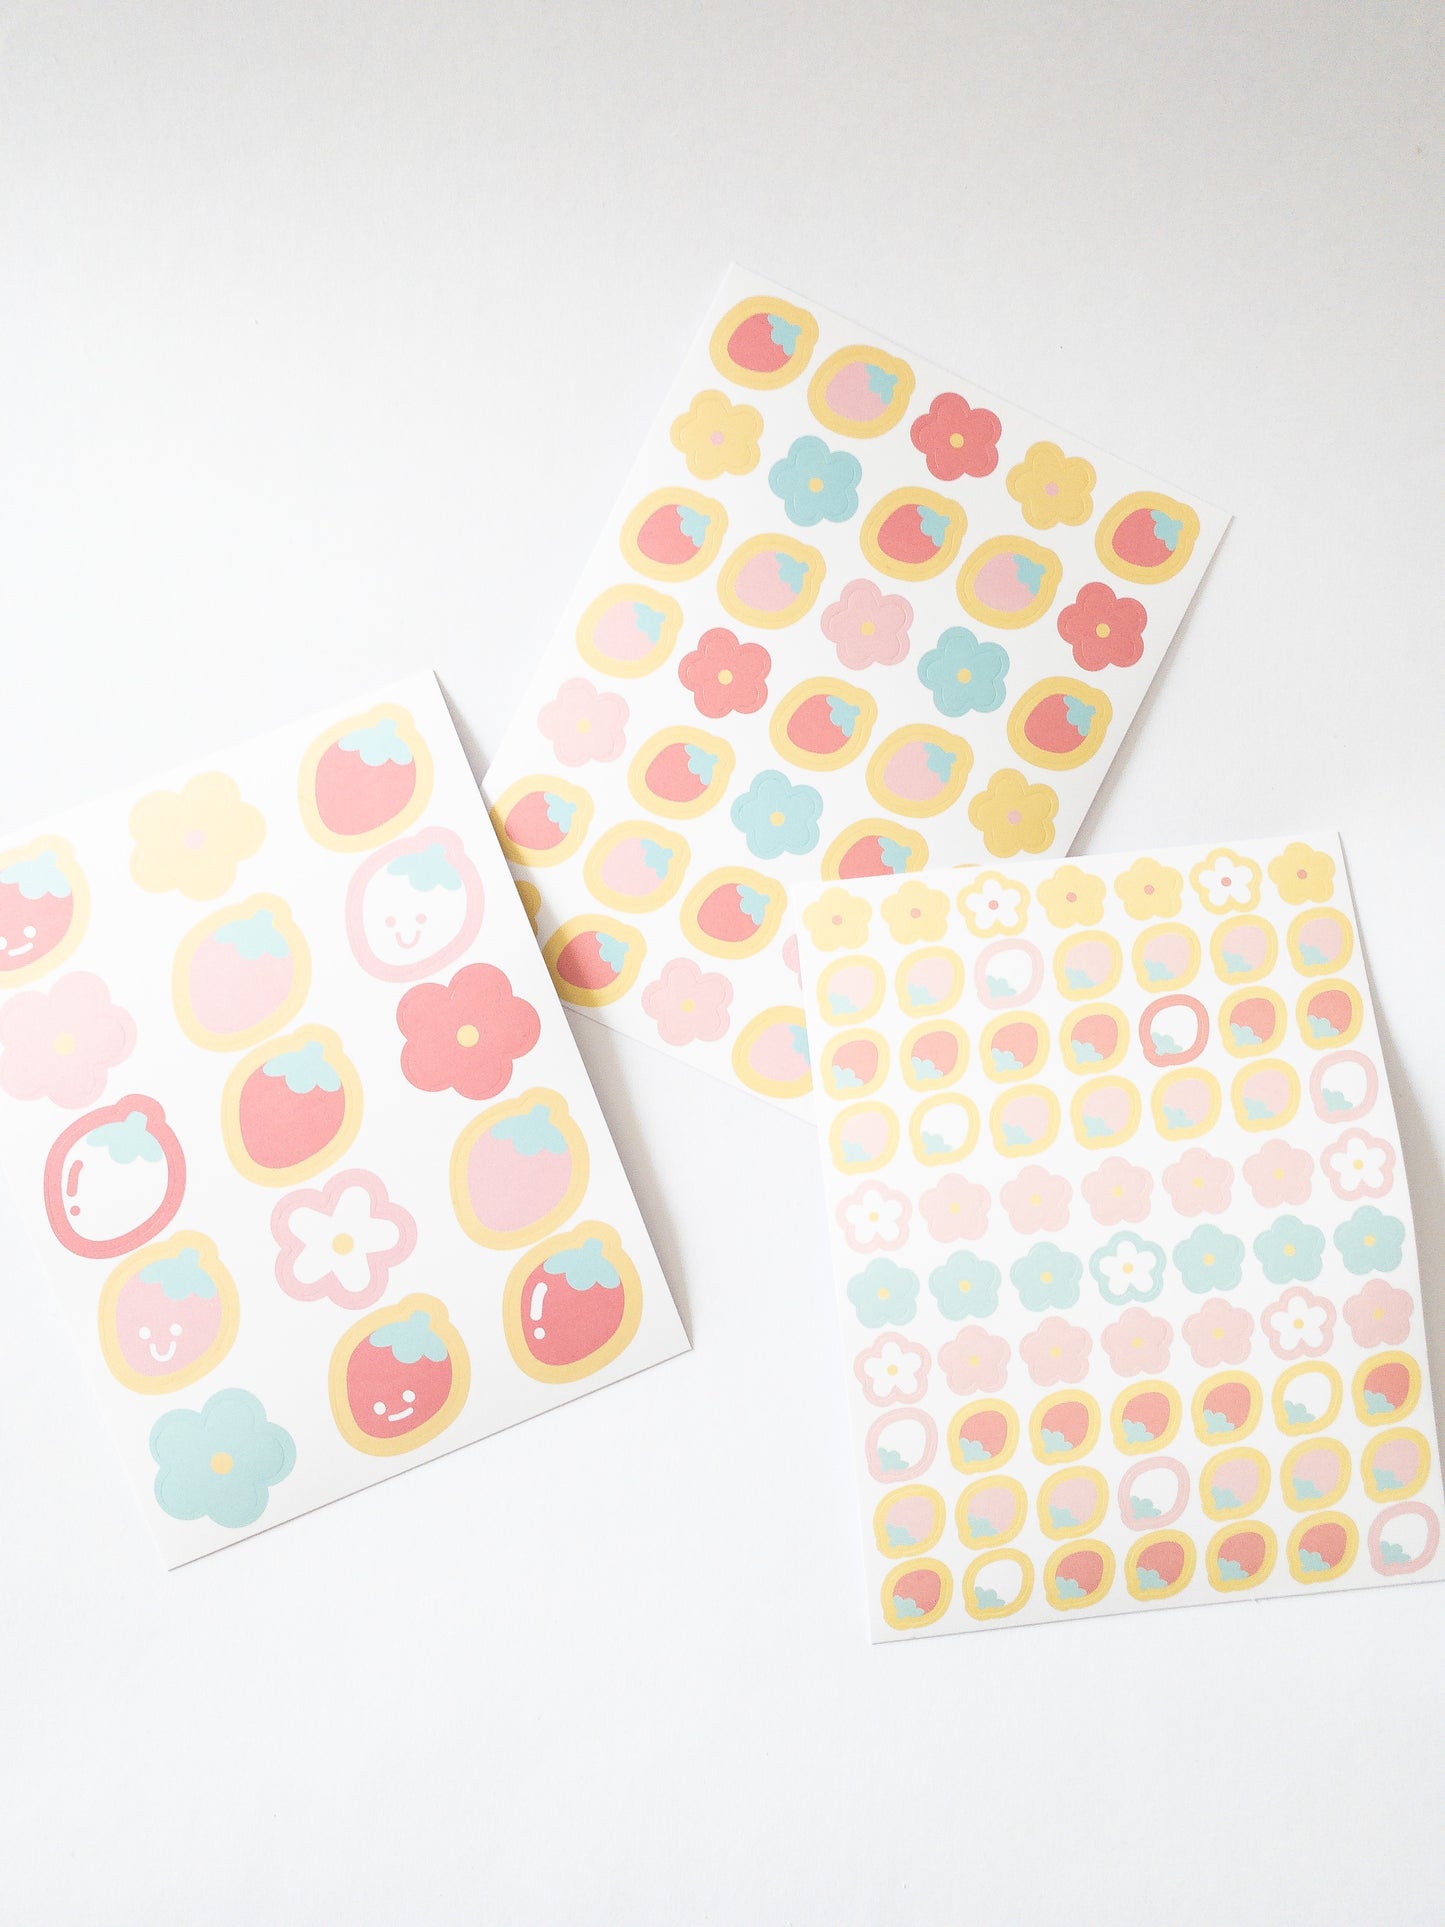 120 Korean style stickers! Three sheets of berry floral goodness. There are 70 mini flowers and strawberries, 35 medium-sized stickers and 15 large happy, smiley strawberries and flowers.